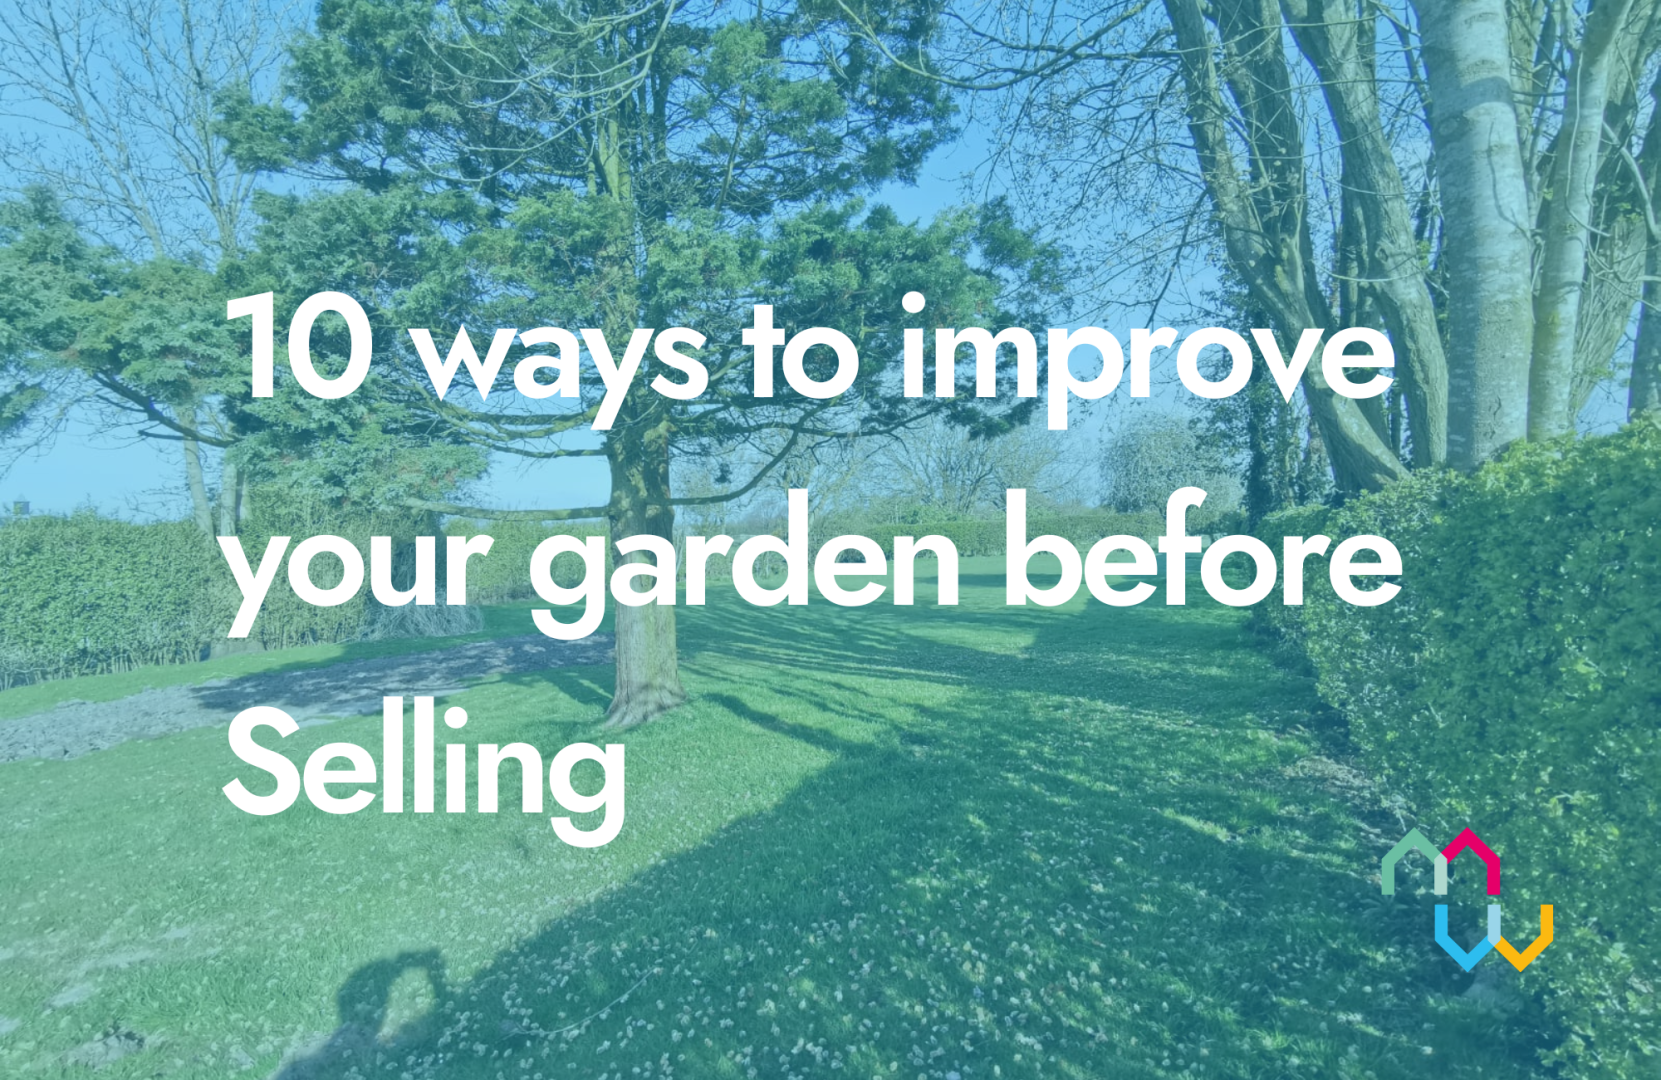 10 ways to improve your garden before Selling